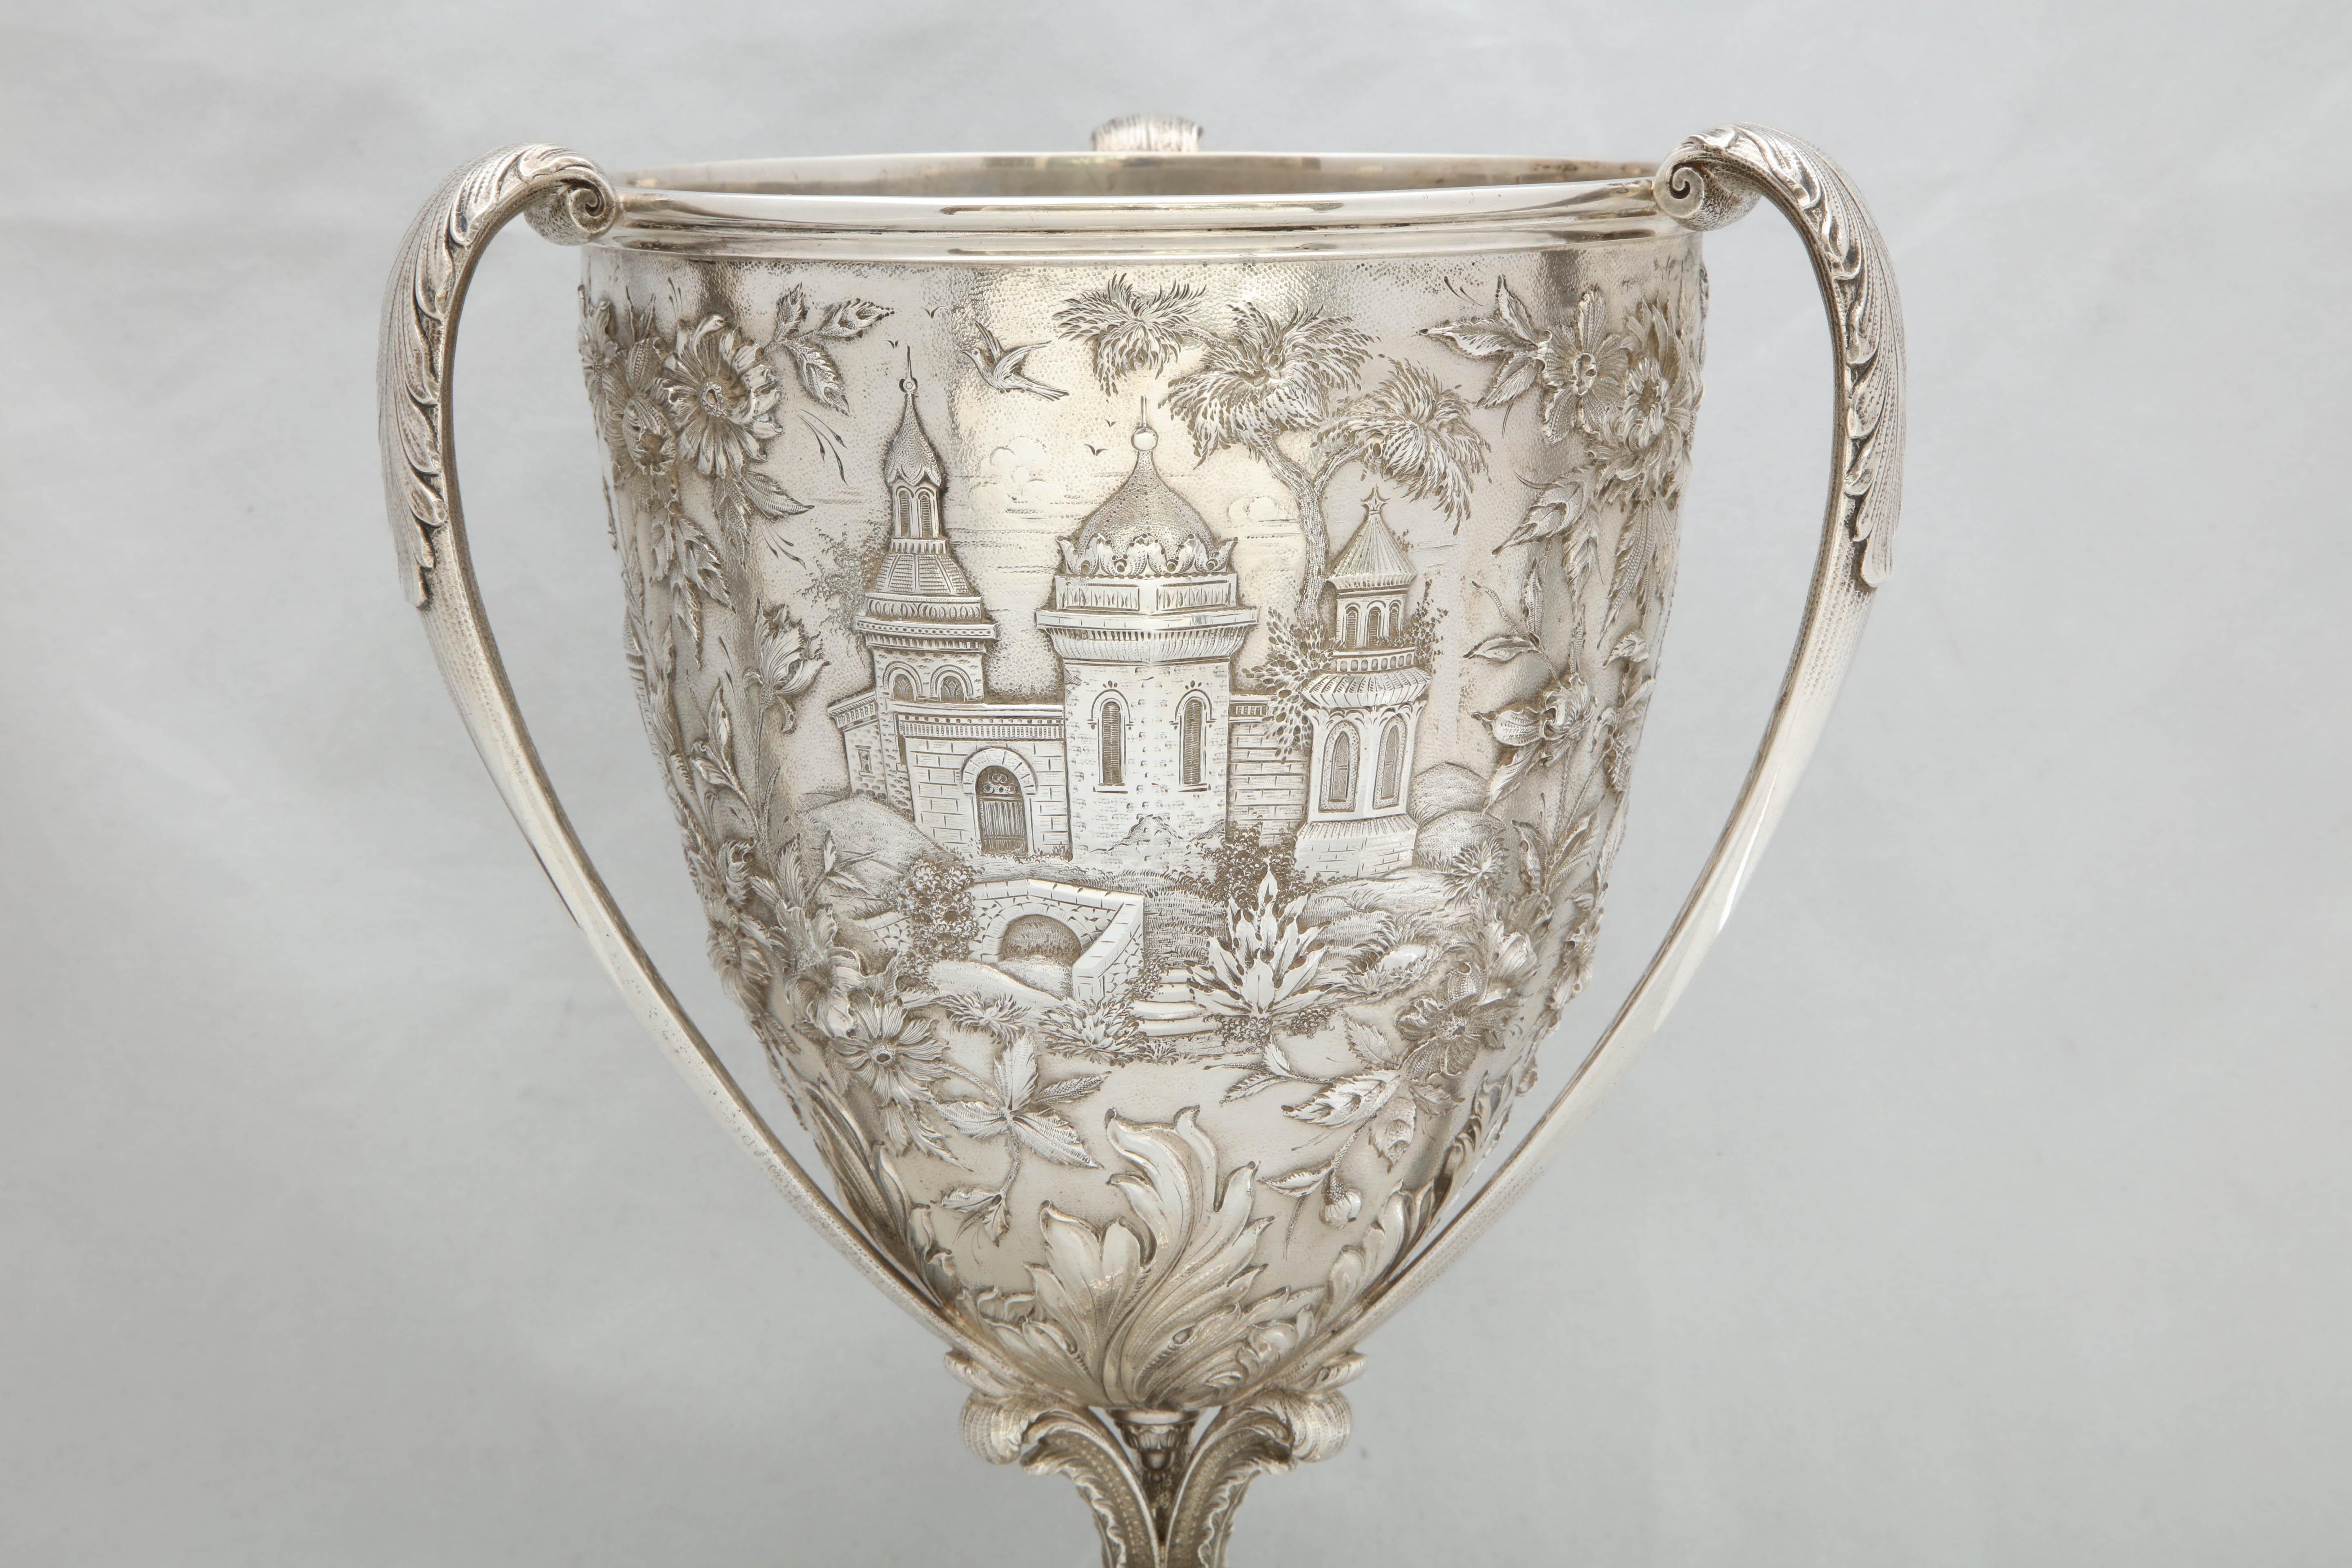 Victorian, sterling silver, three-handled loving cup, S. Kirk and Son, Inc., Baltimore, Maryland, circa 1880s. Chased with architectural scenes. Pedestal base. Measures 12 1/2 inches high x 7 inches diameter across opening x 8 inches wide from